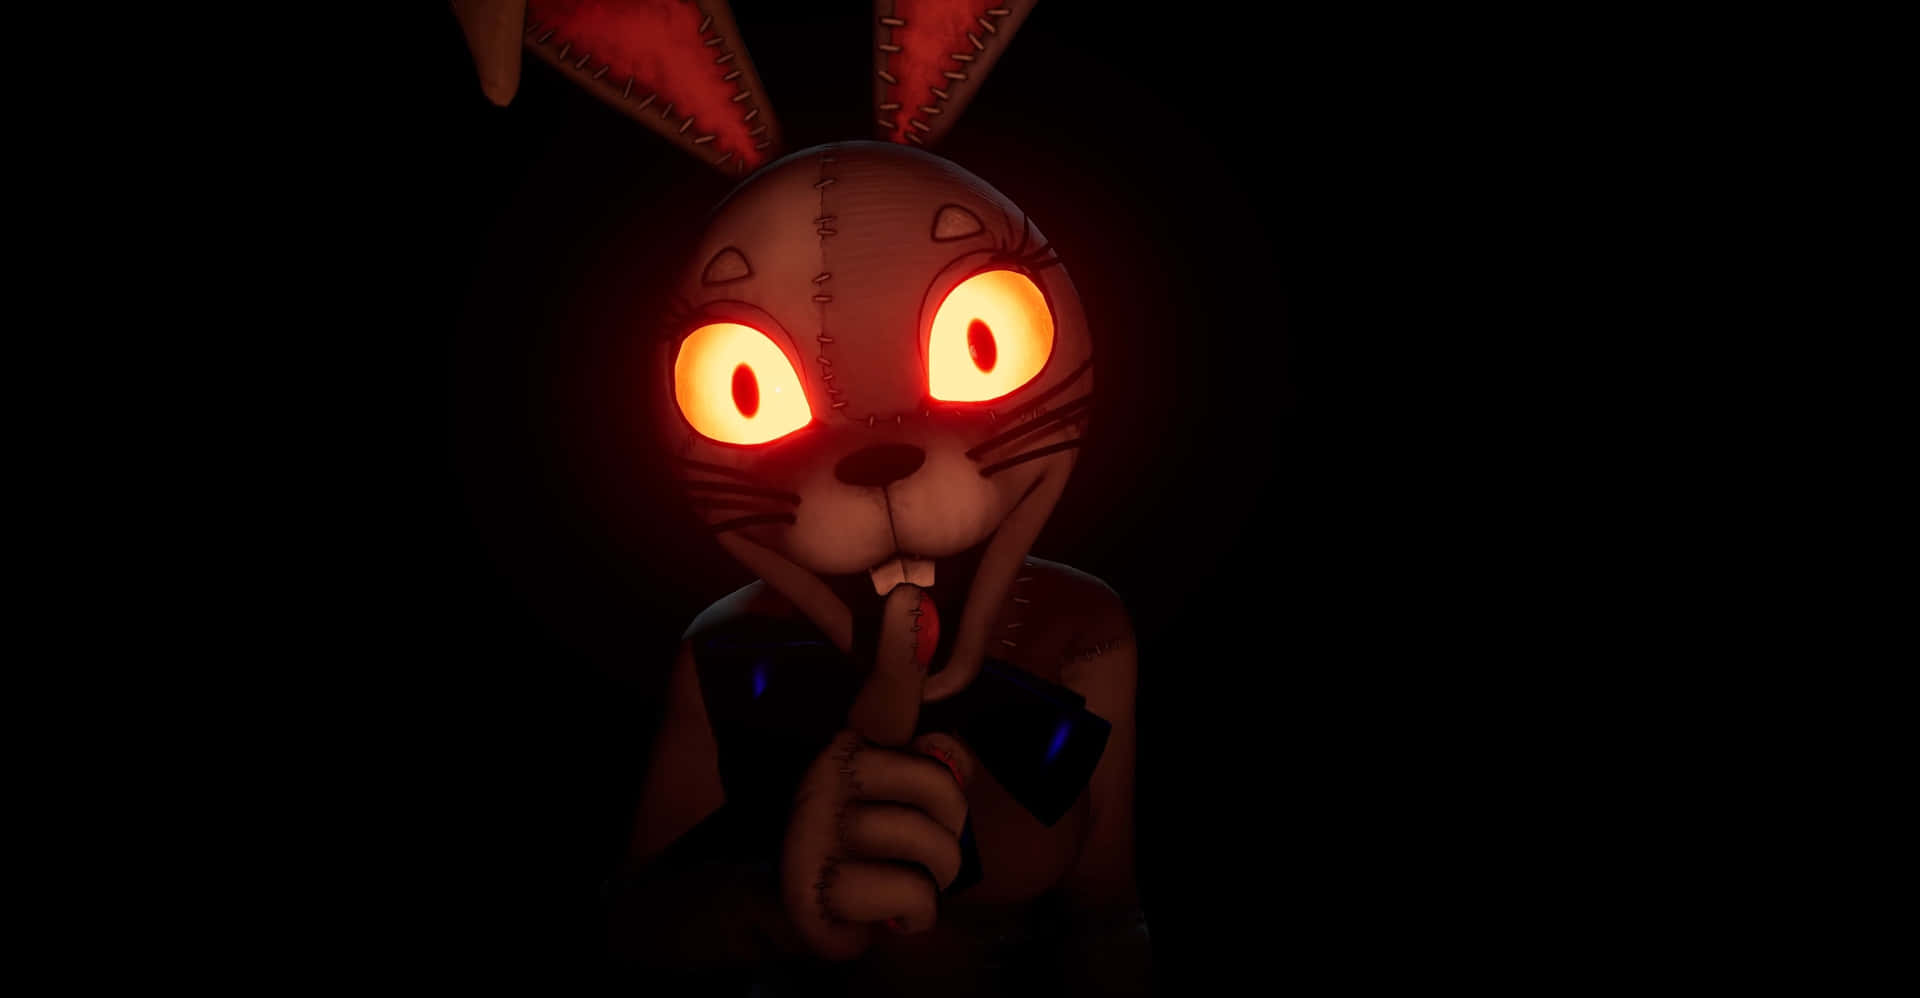 A Rabbit With Red Eyes Is Holding A Cigarette